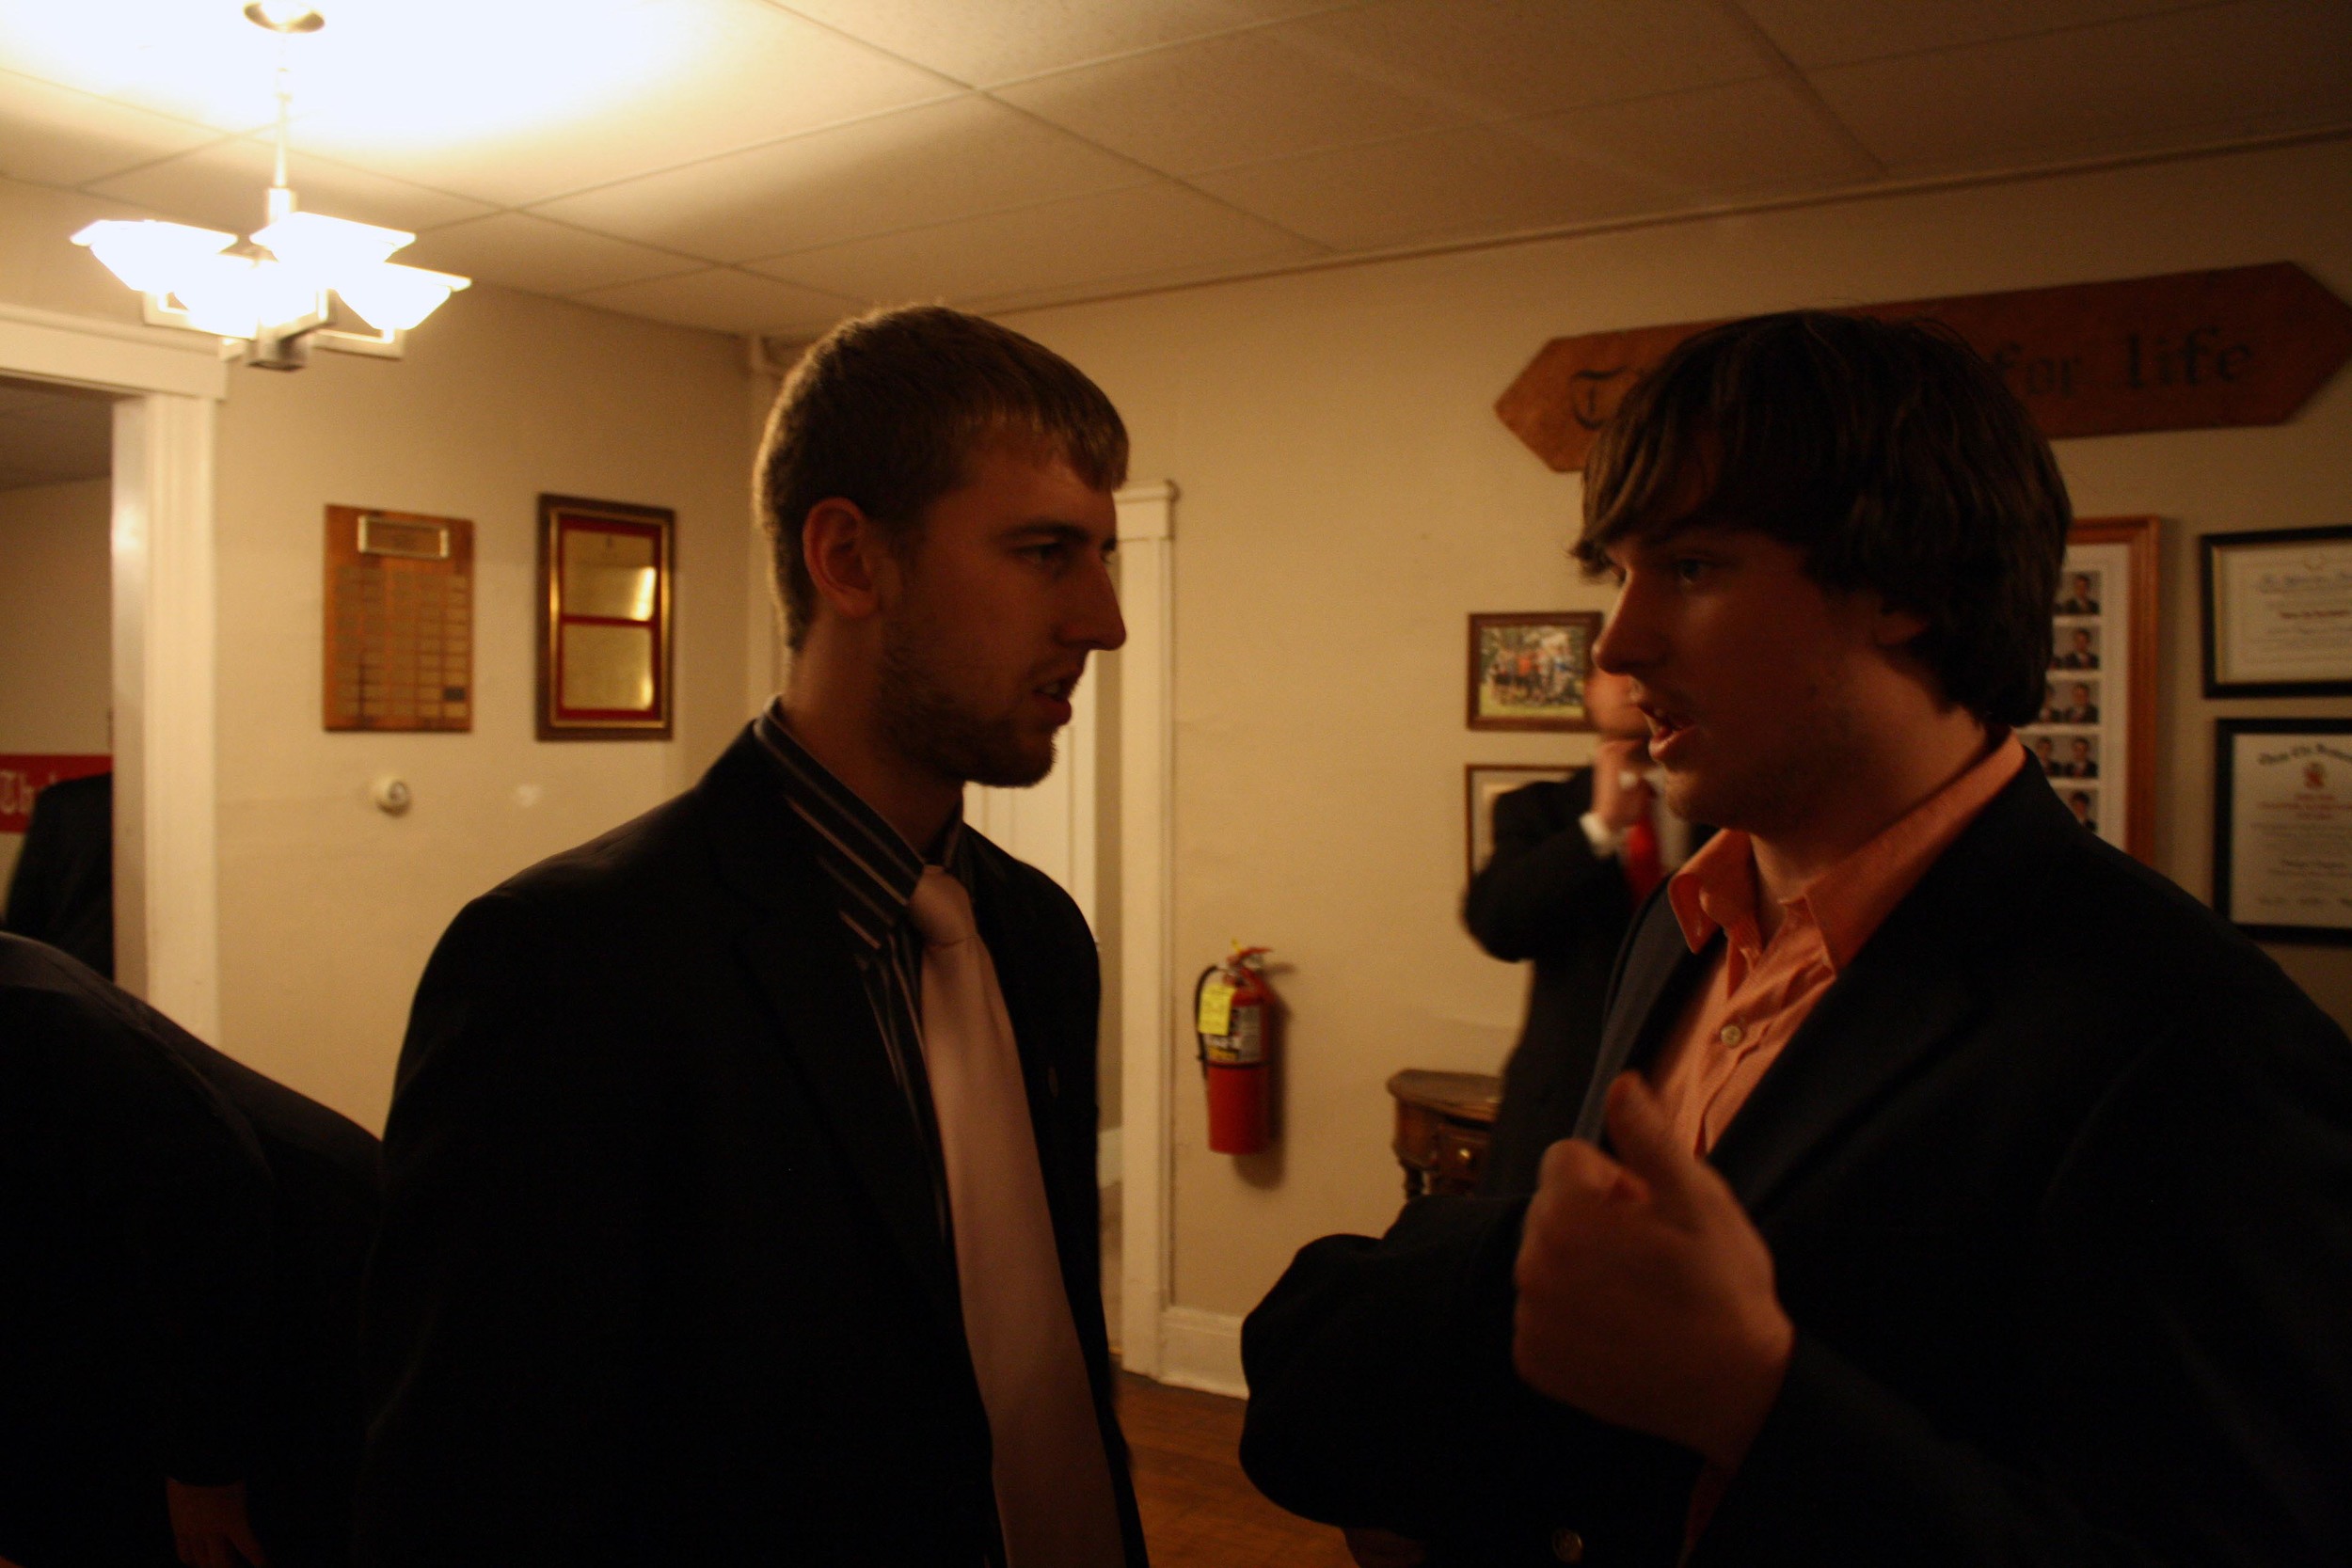  David Stoltzfus (L) conversing with little brother Sam Shively (R)
Spring 2012 Initiation Night 